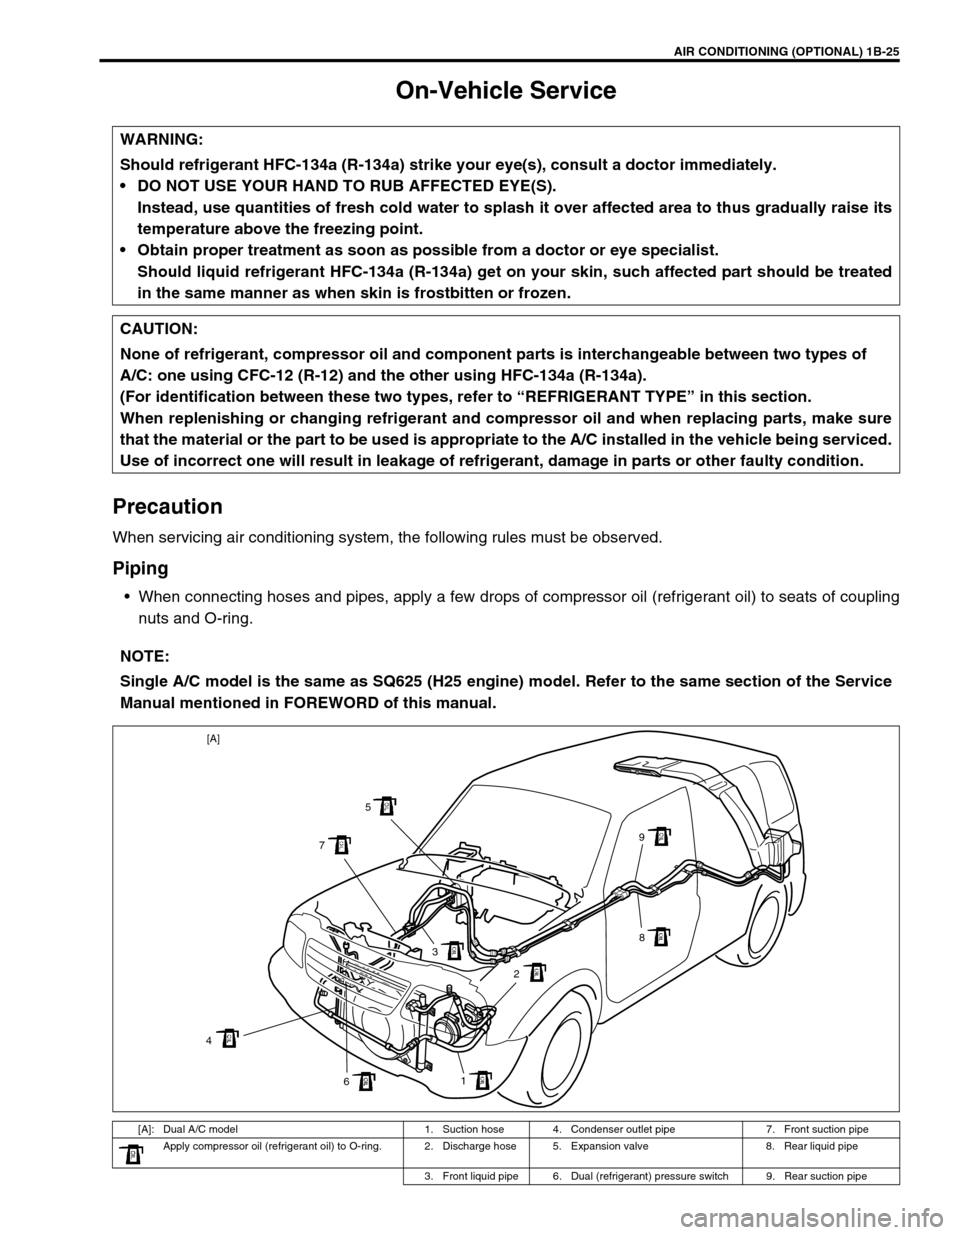 SUZUKI GRAND VITARA 1999 2.G User Guide AIR CONDITIONING (OPTIONAL) 1B-25
On-Vehicle Service
Precaution
When servicing air conditioning system, the following rules must be observed.
Piping
When connecting hoses and pipes, apply a few drops